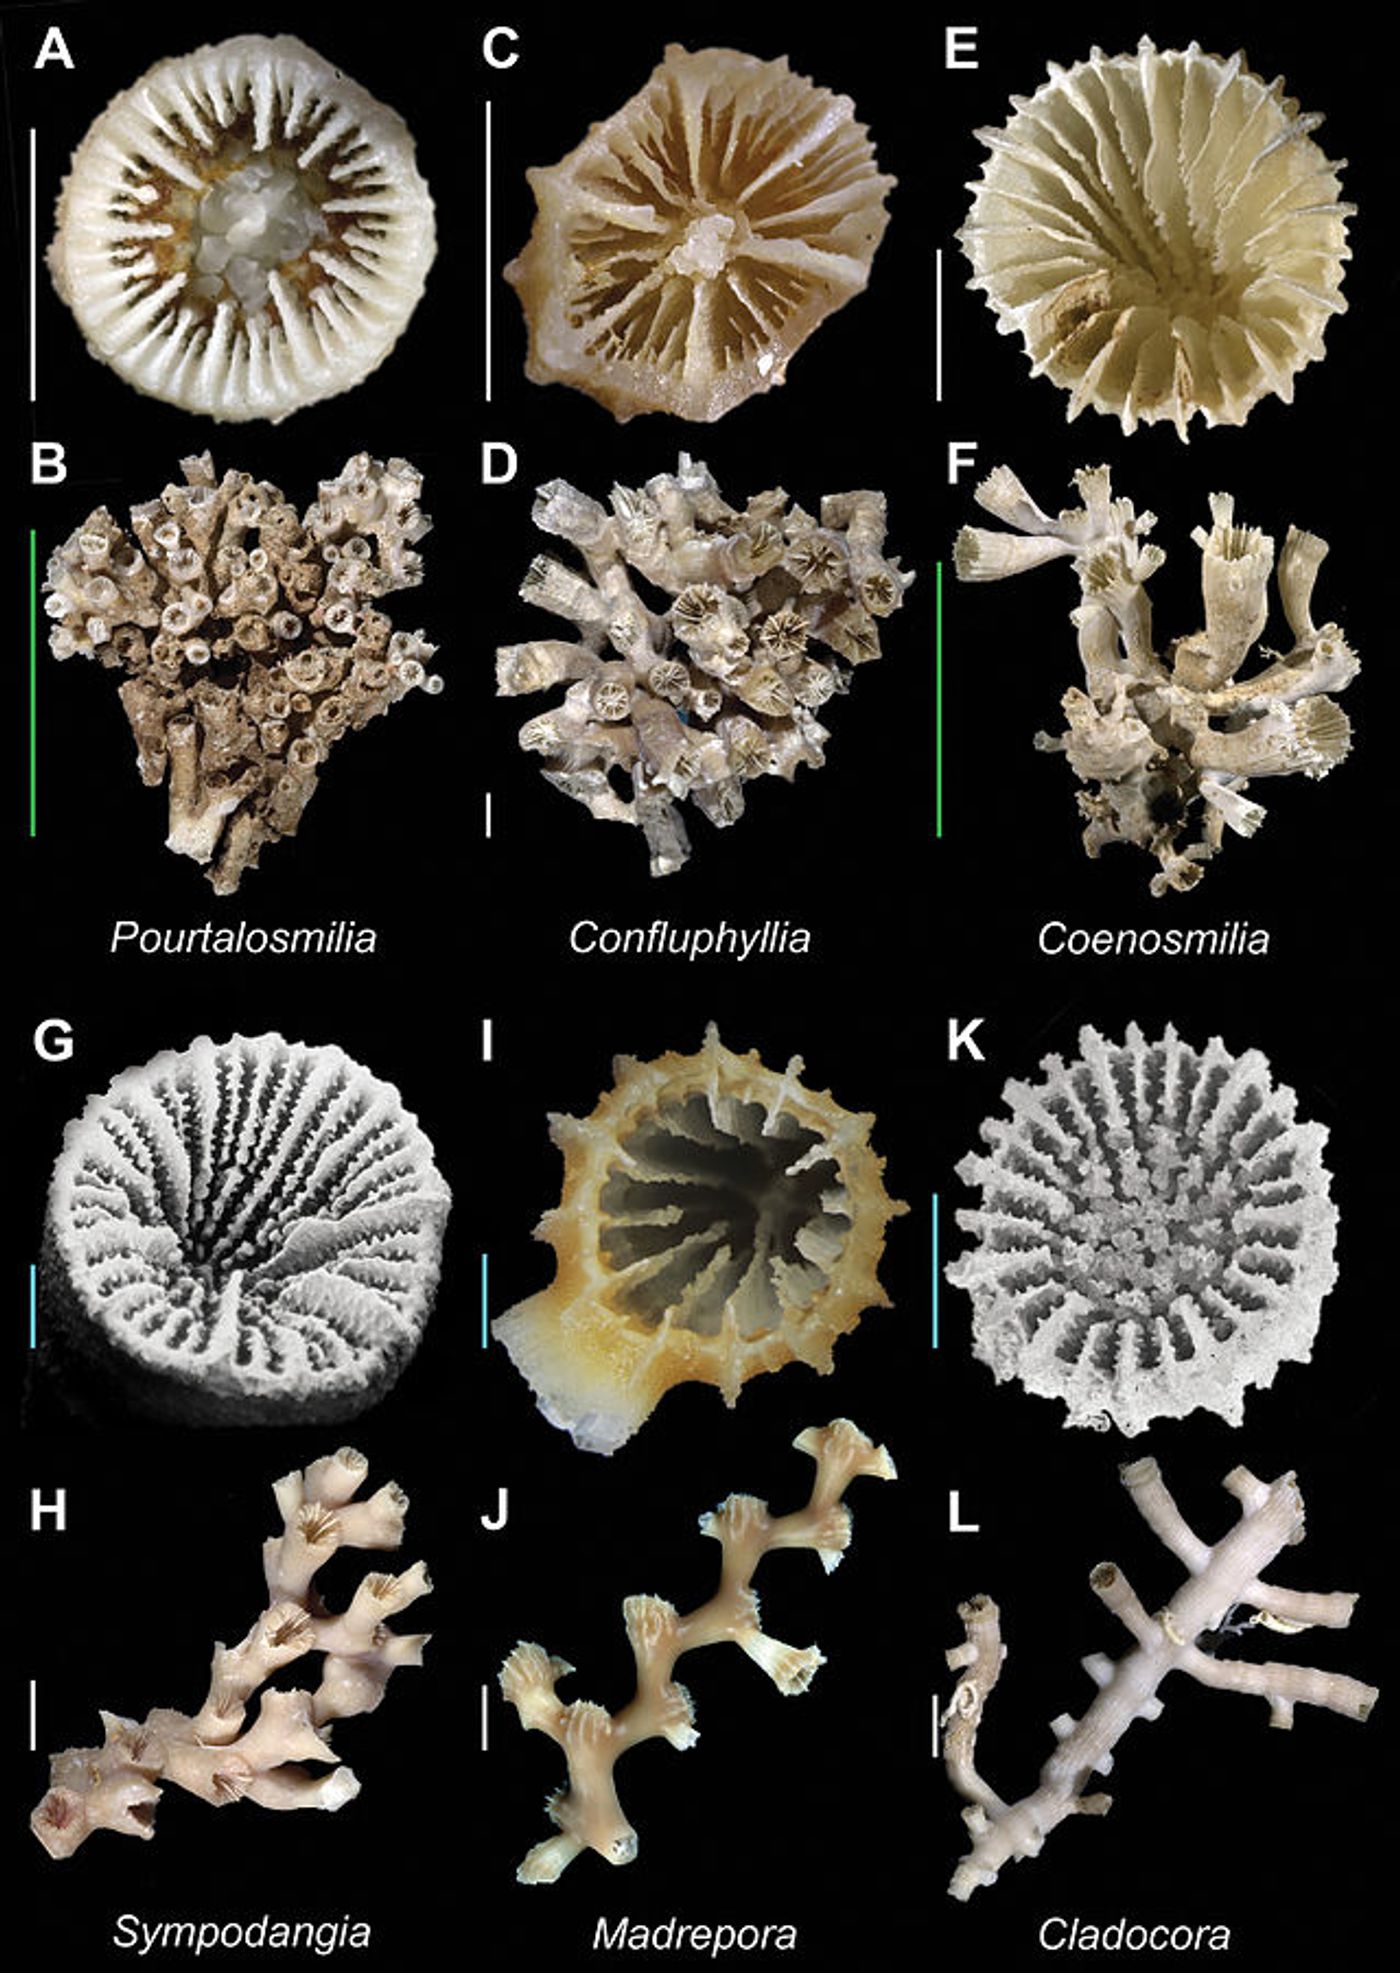 A key illustrating some Scleractinian corals. Photo: ZooKeys